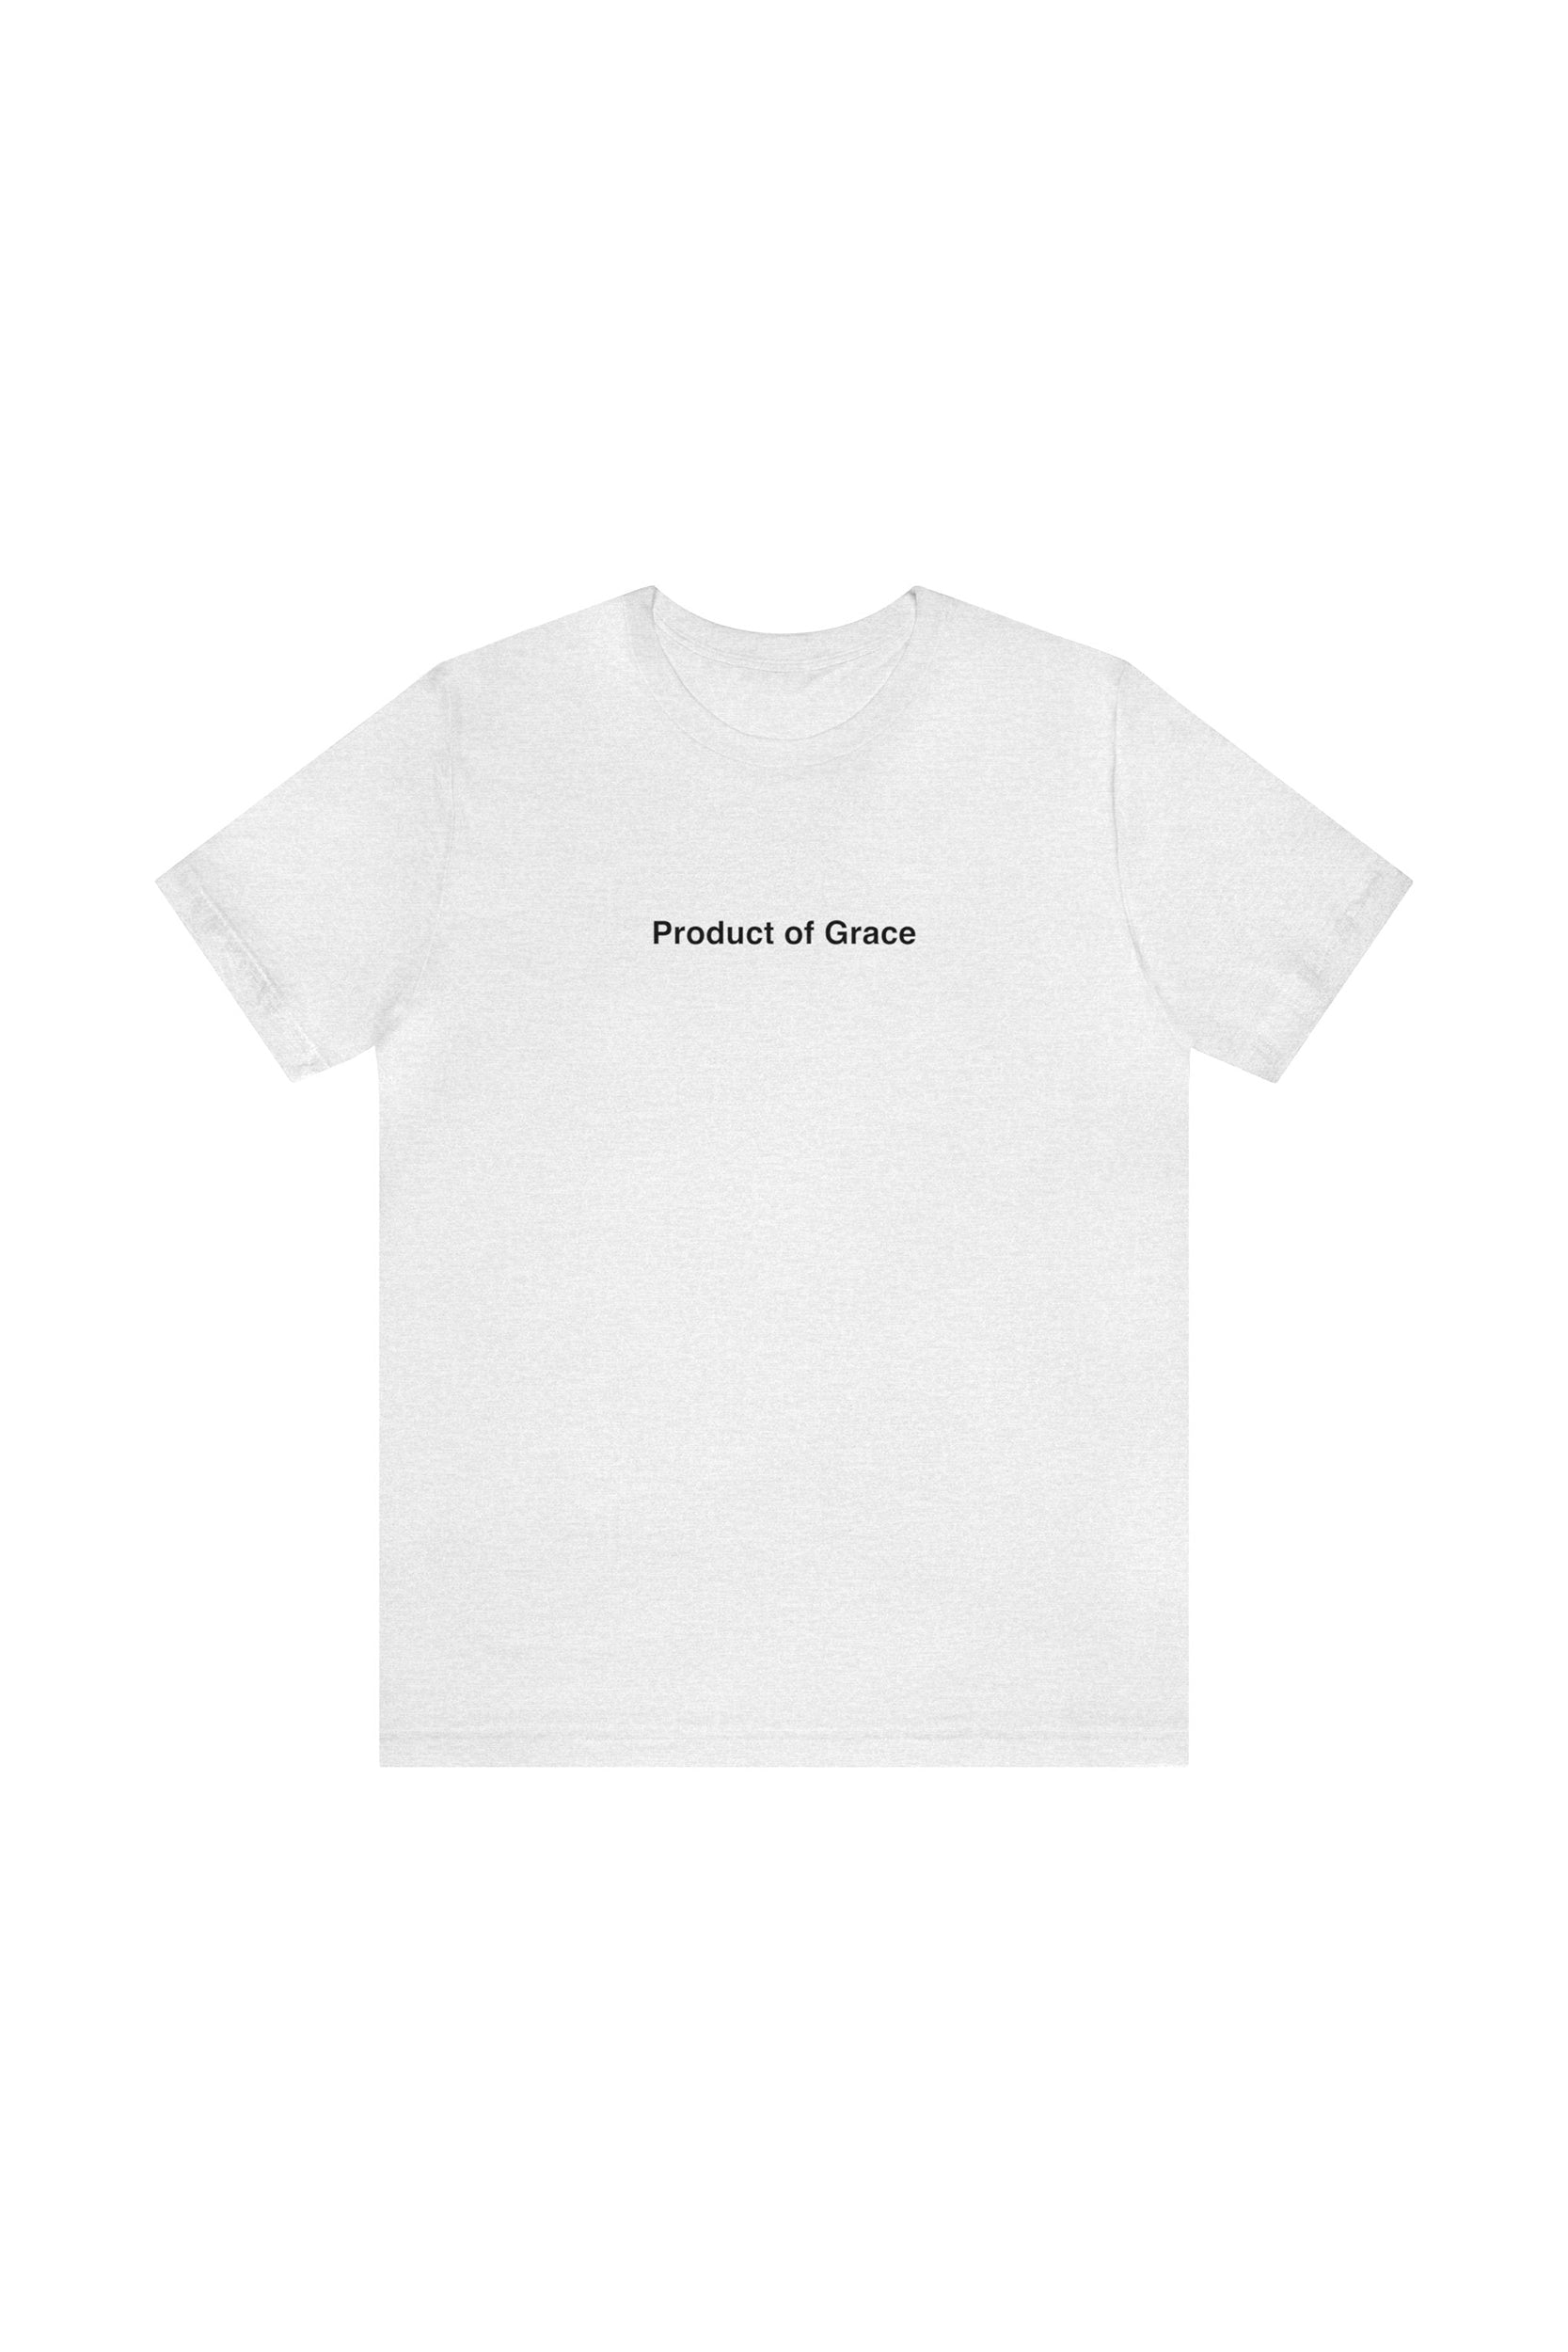 "Product of Grace" T-Shirt